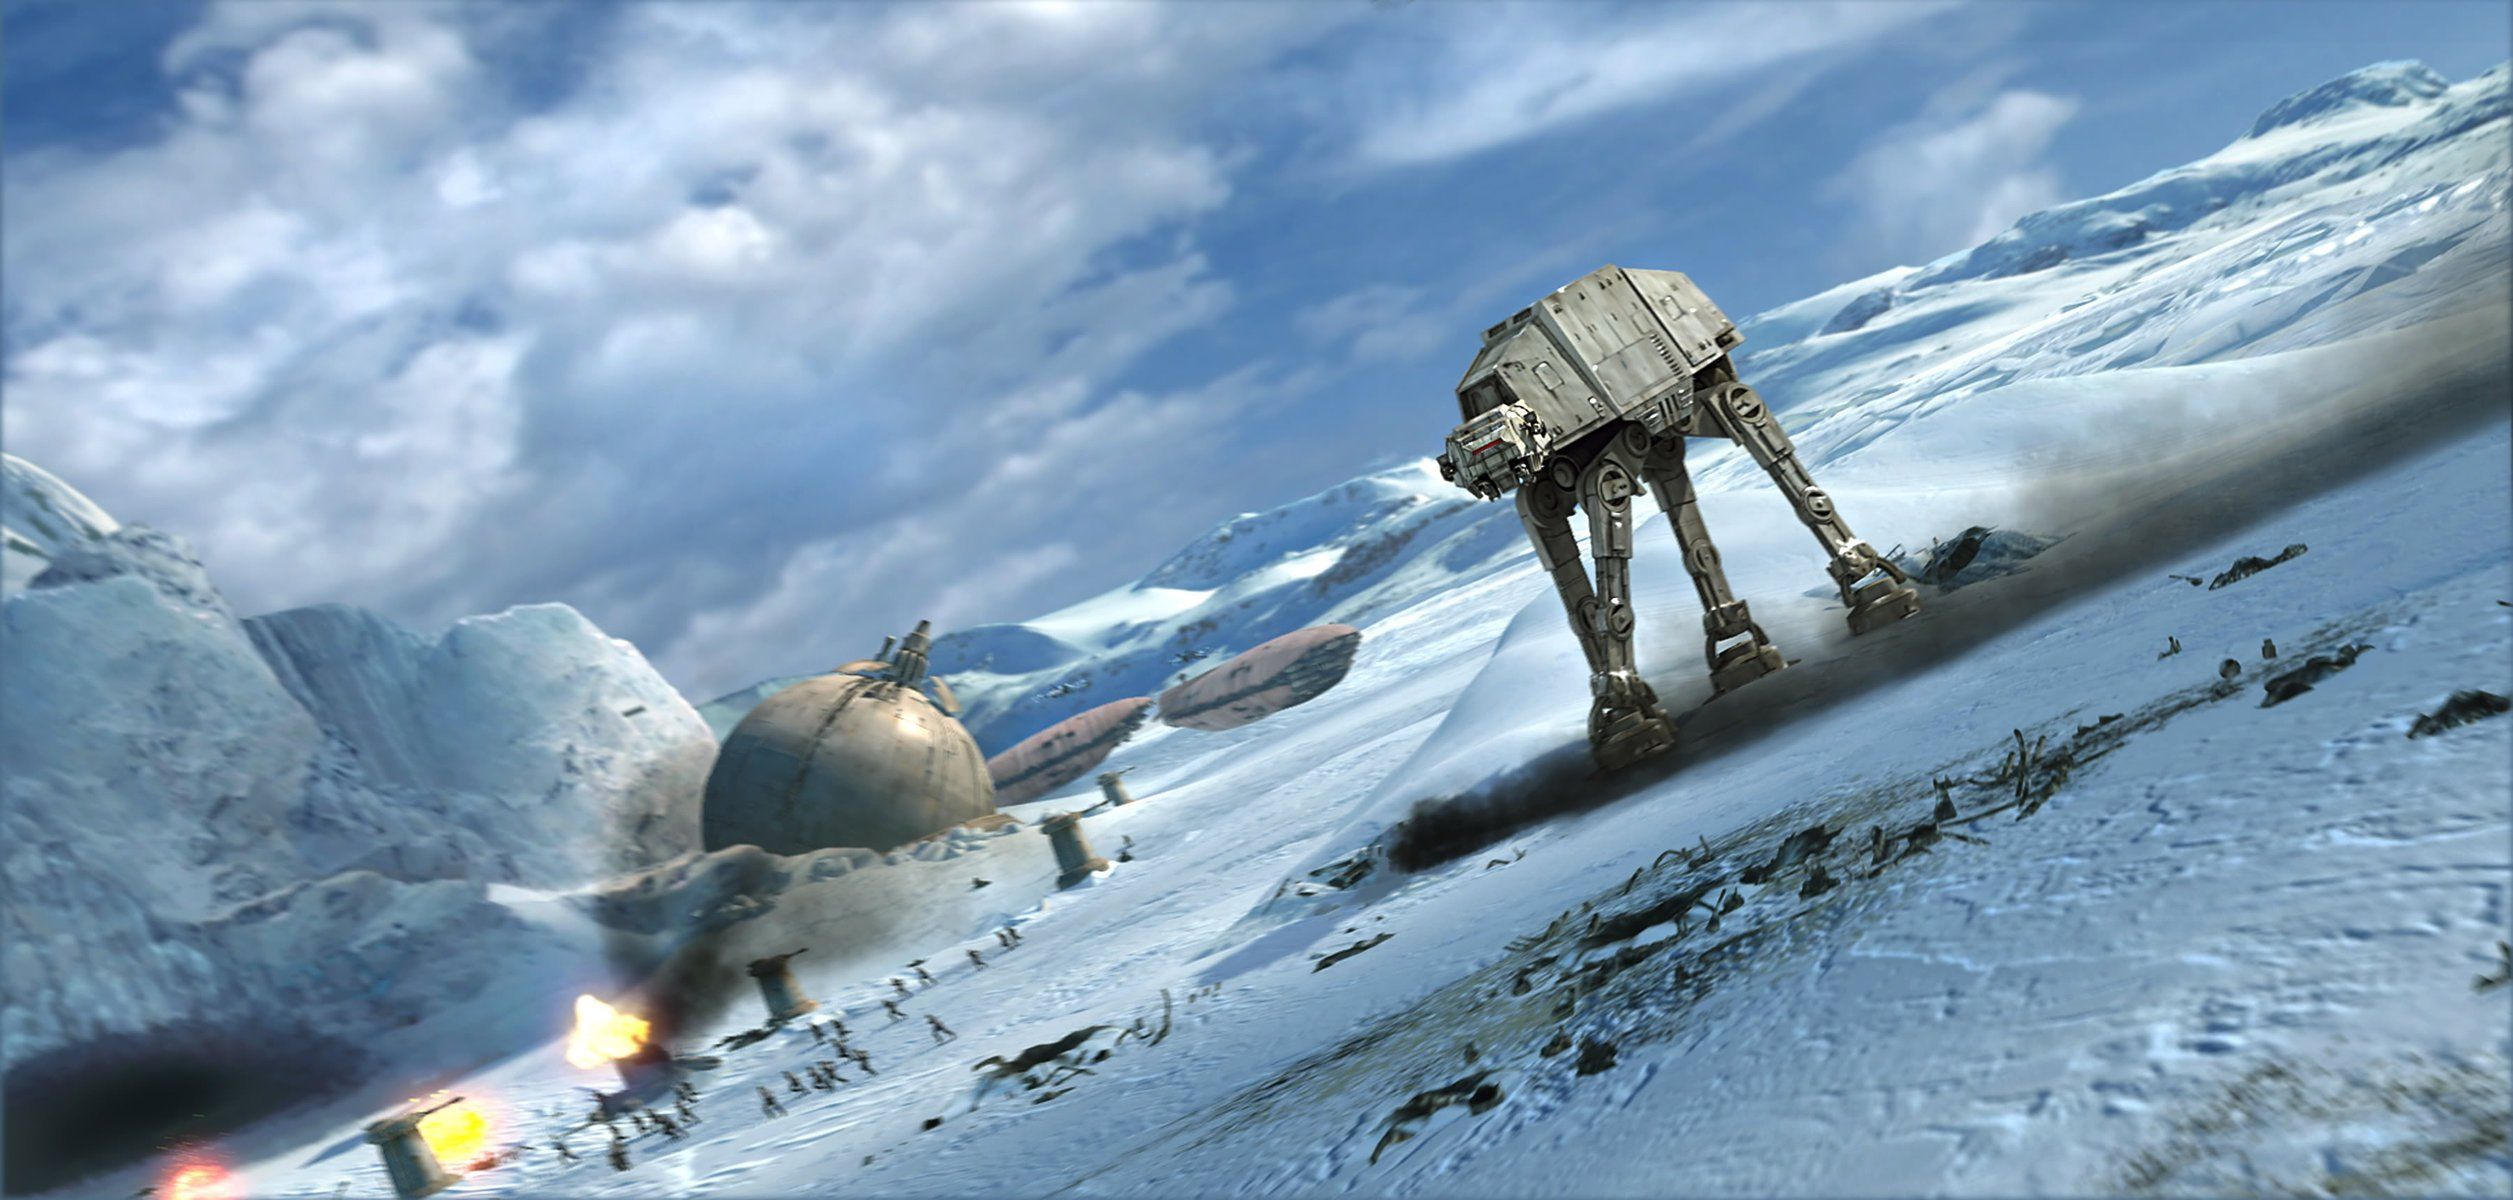 Star Wars The Rebel Base Hot Star Wars Tank On On Empire Attack Fiction Movie The Sky Clouds Day Cold Frost HD Wallpaper